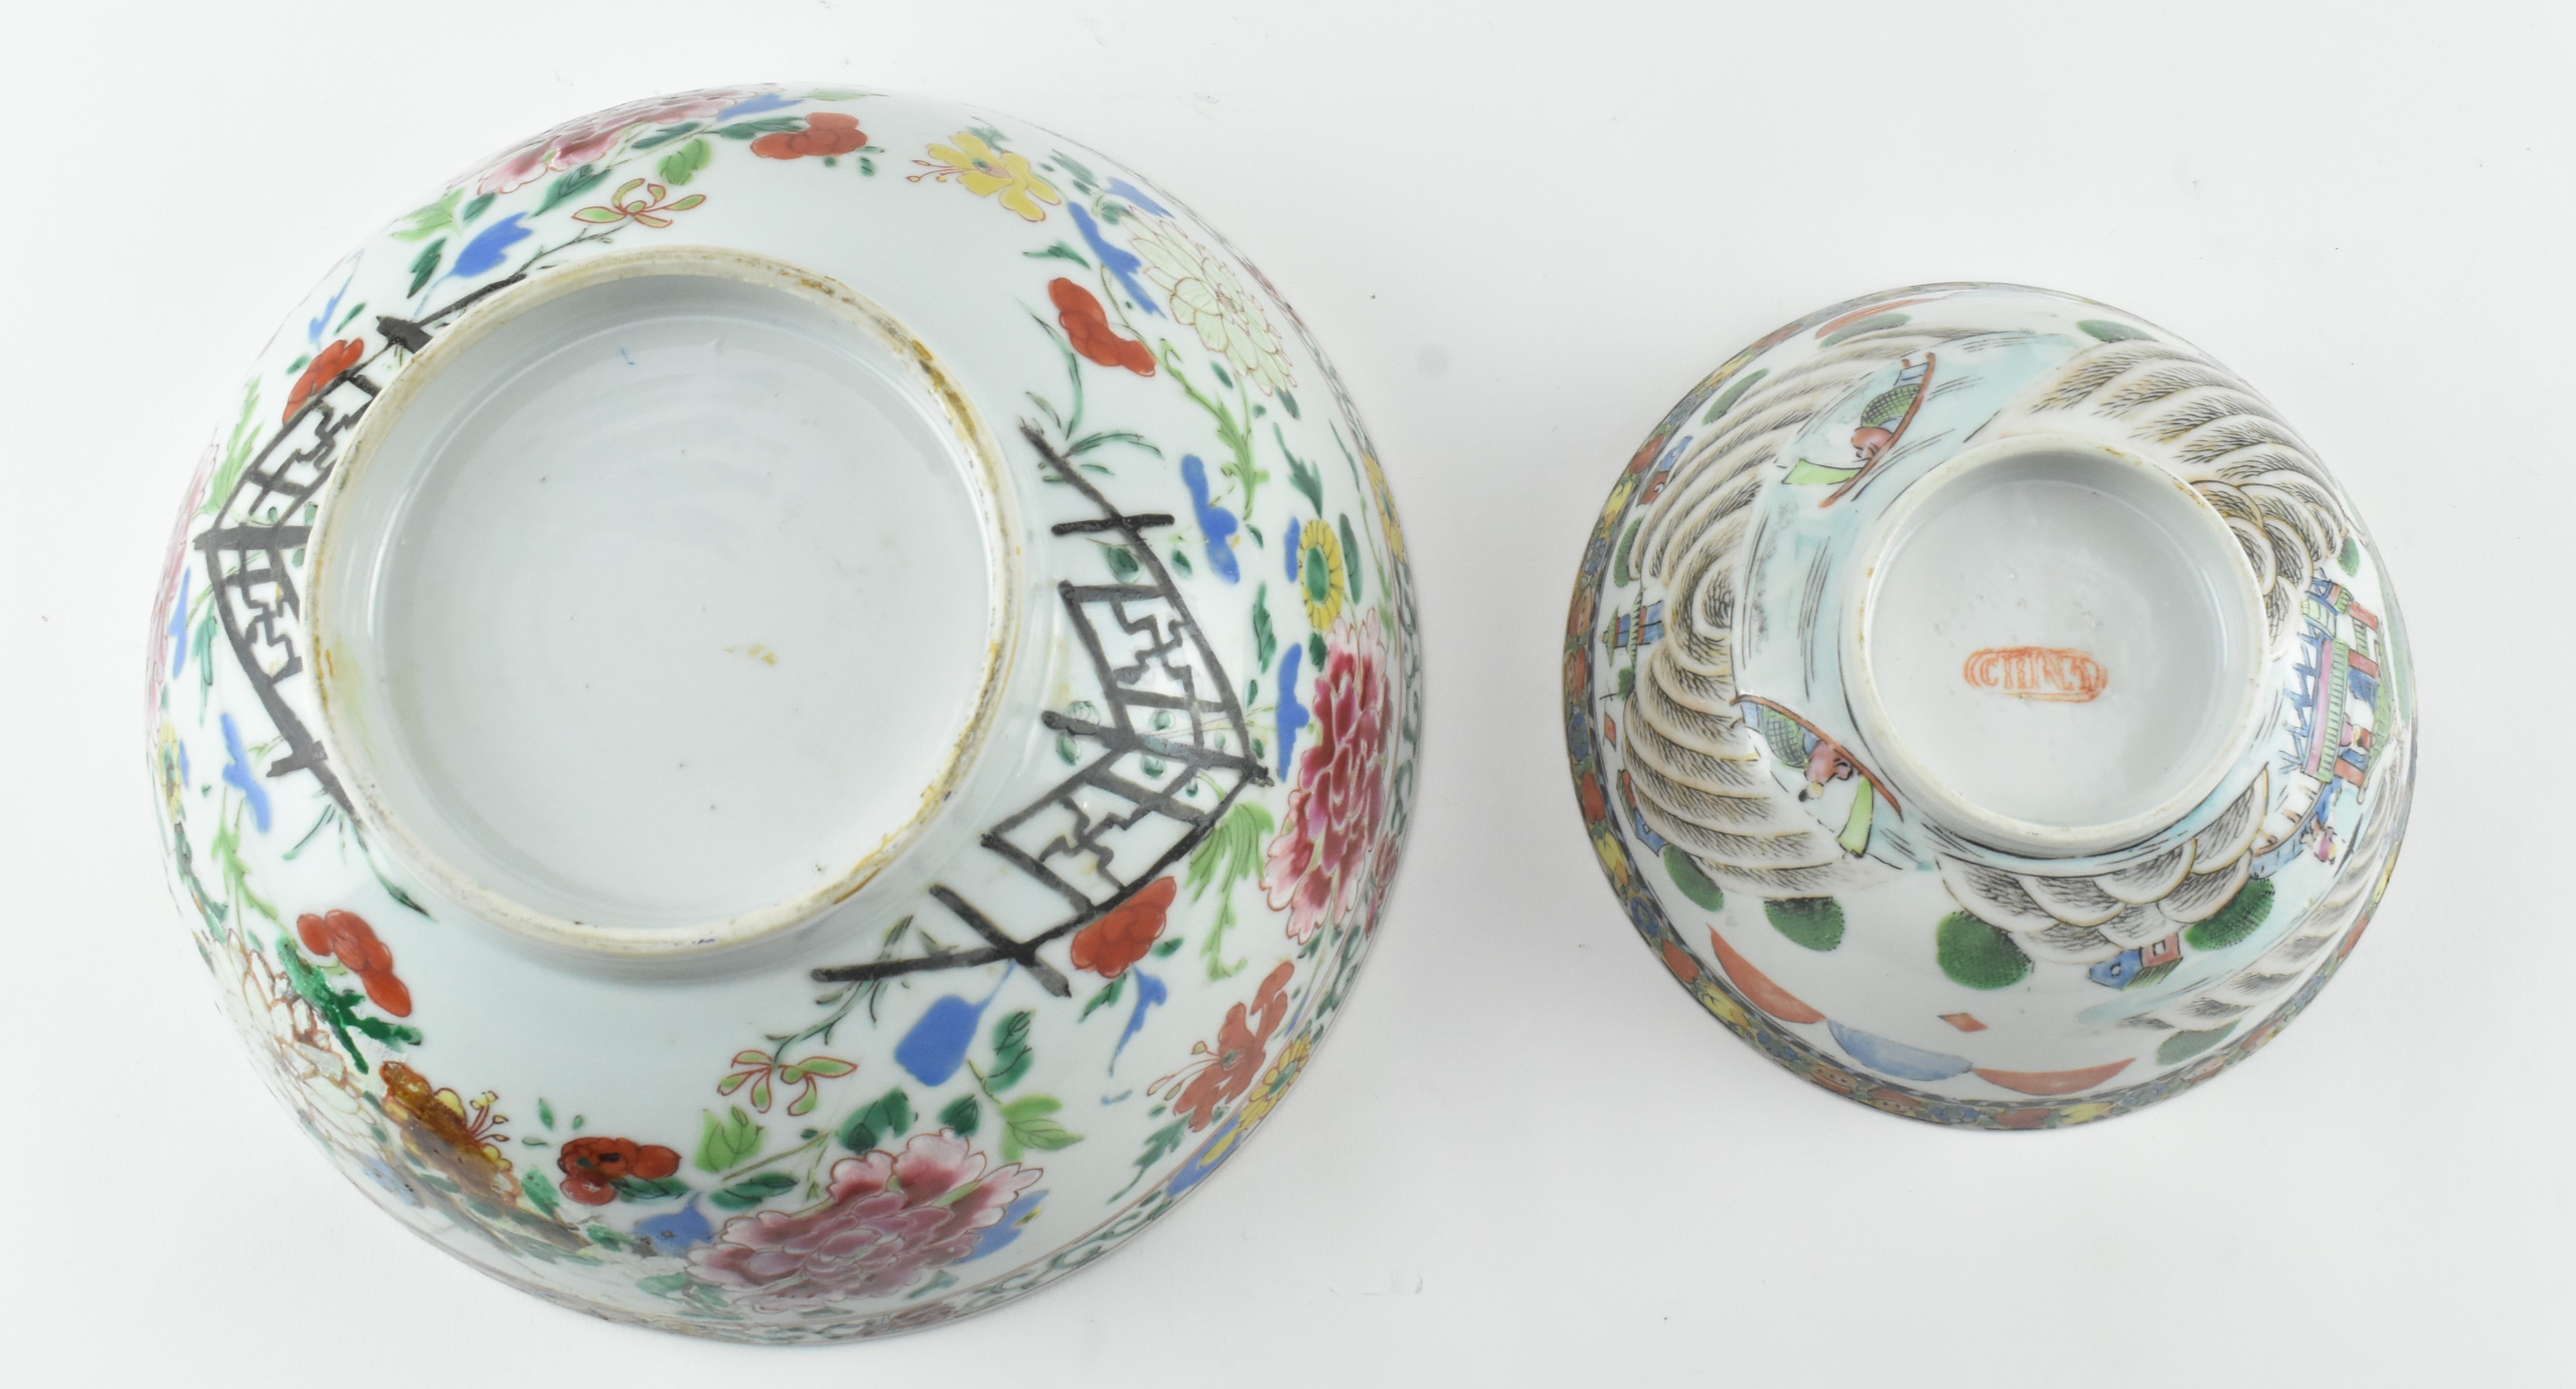 TWO QING DYNASTY FAMILLE ROSE BOWLS 清 粉彩碗 - Image 4 of 6